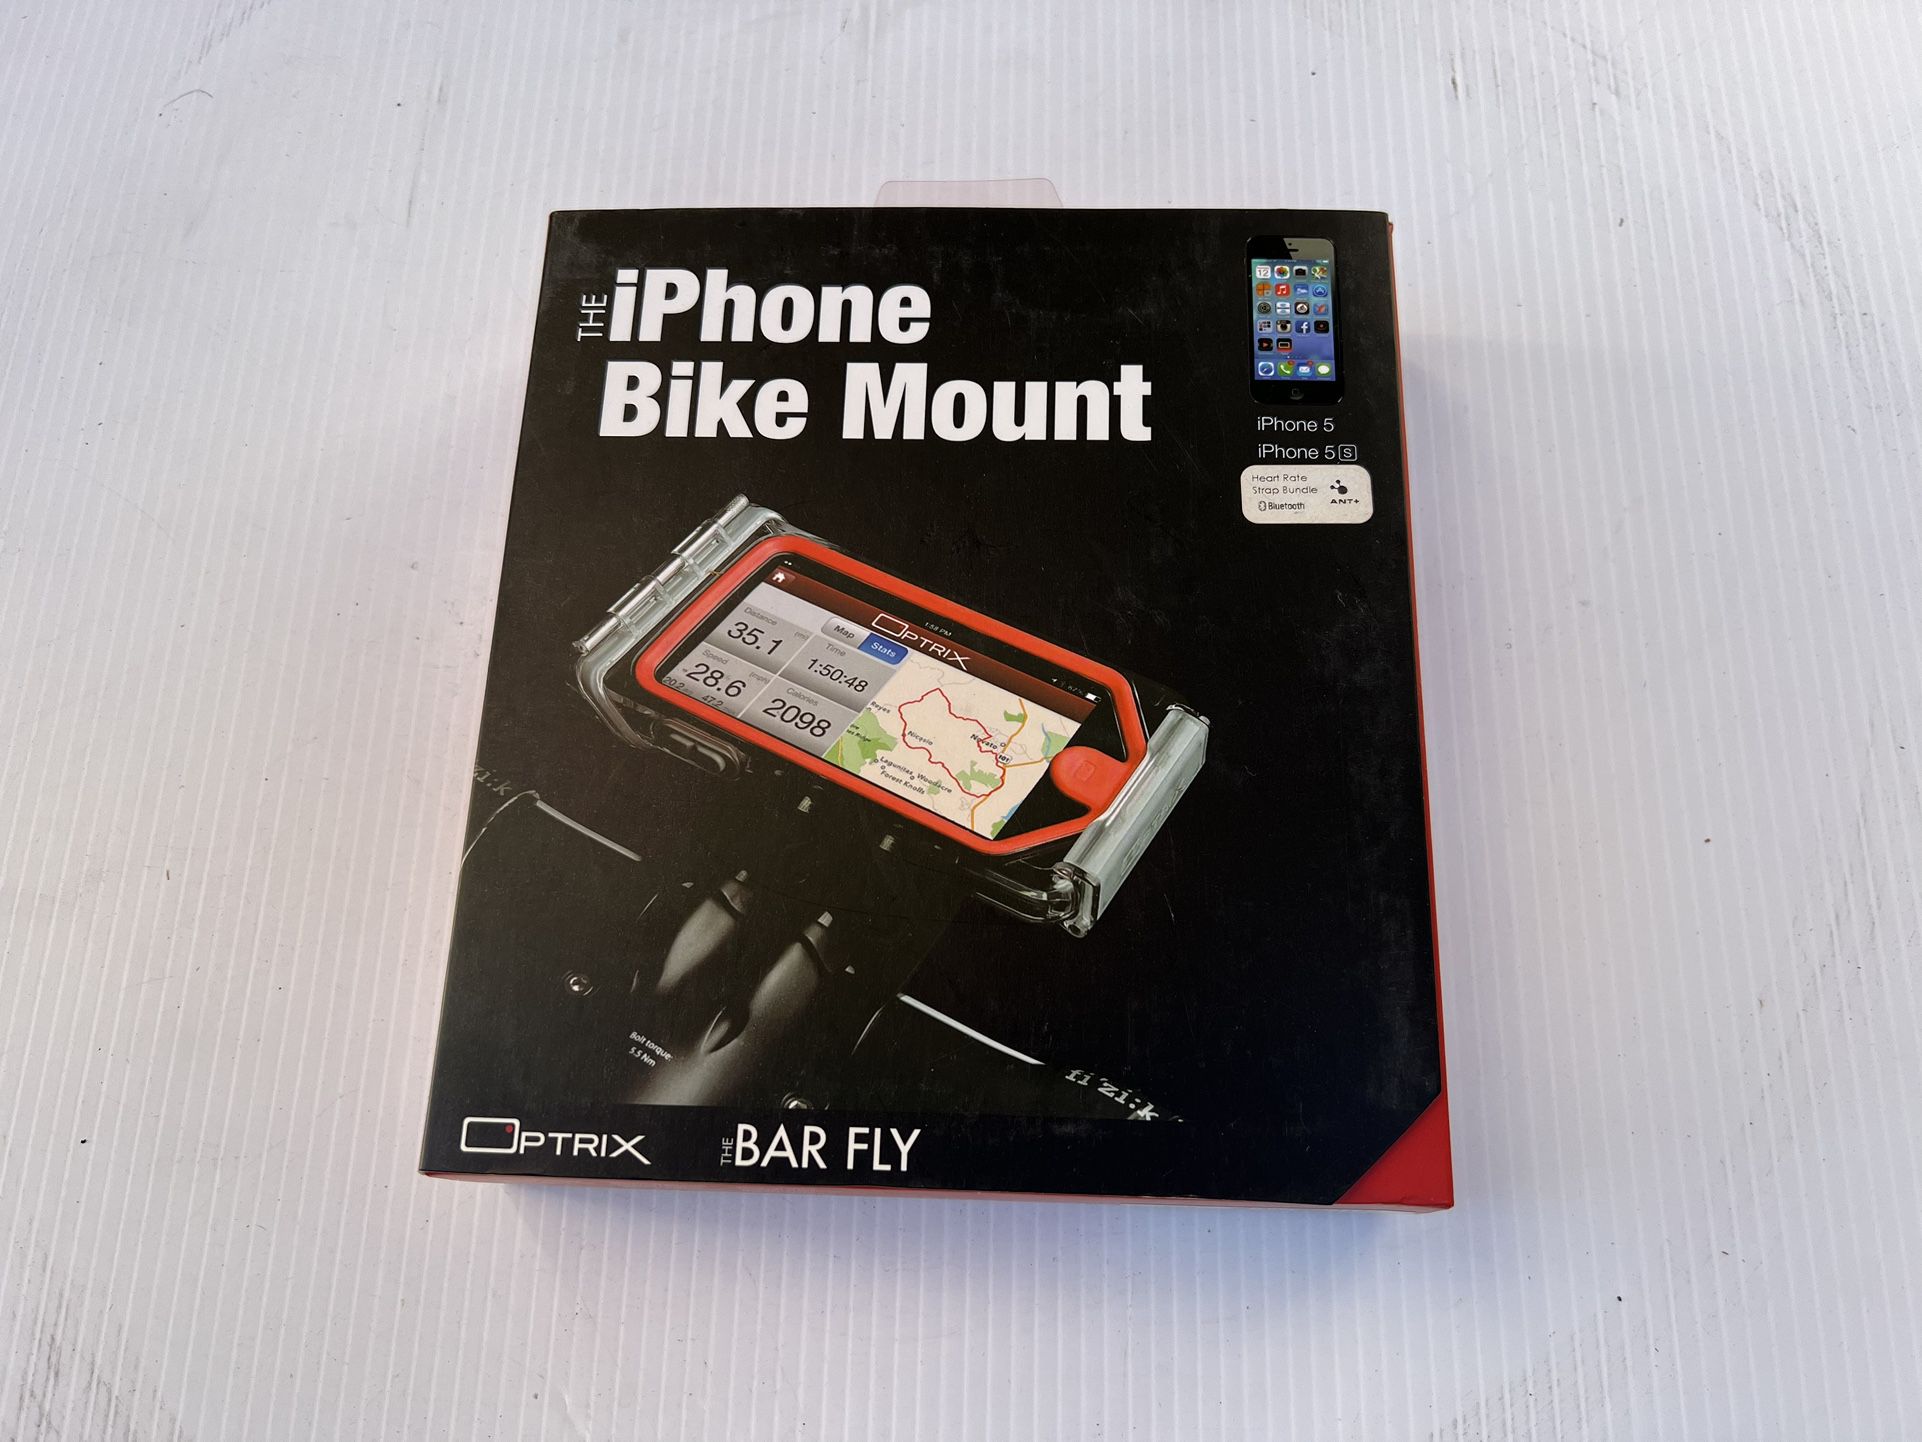 BarFly Iphone Case & Mount Bundle GPS + Fitness Set New in Box!